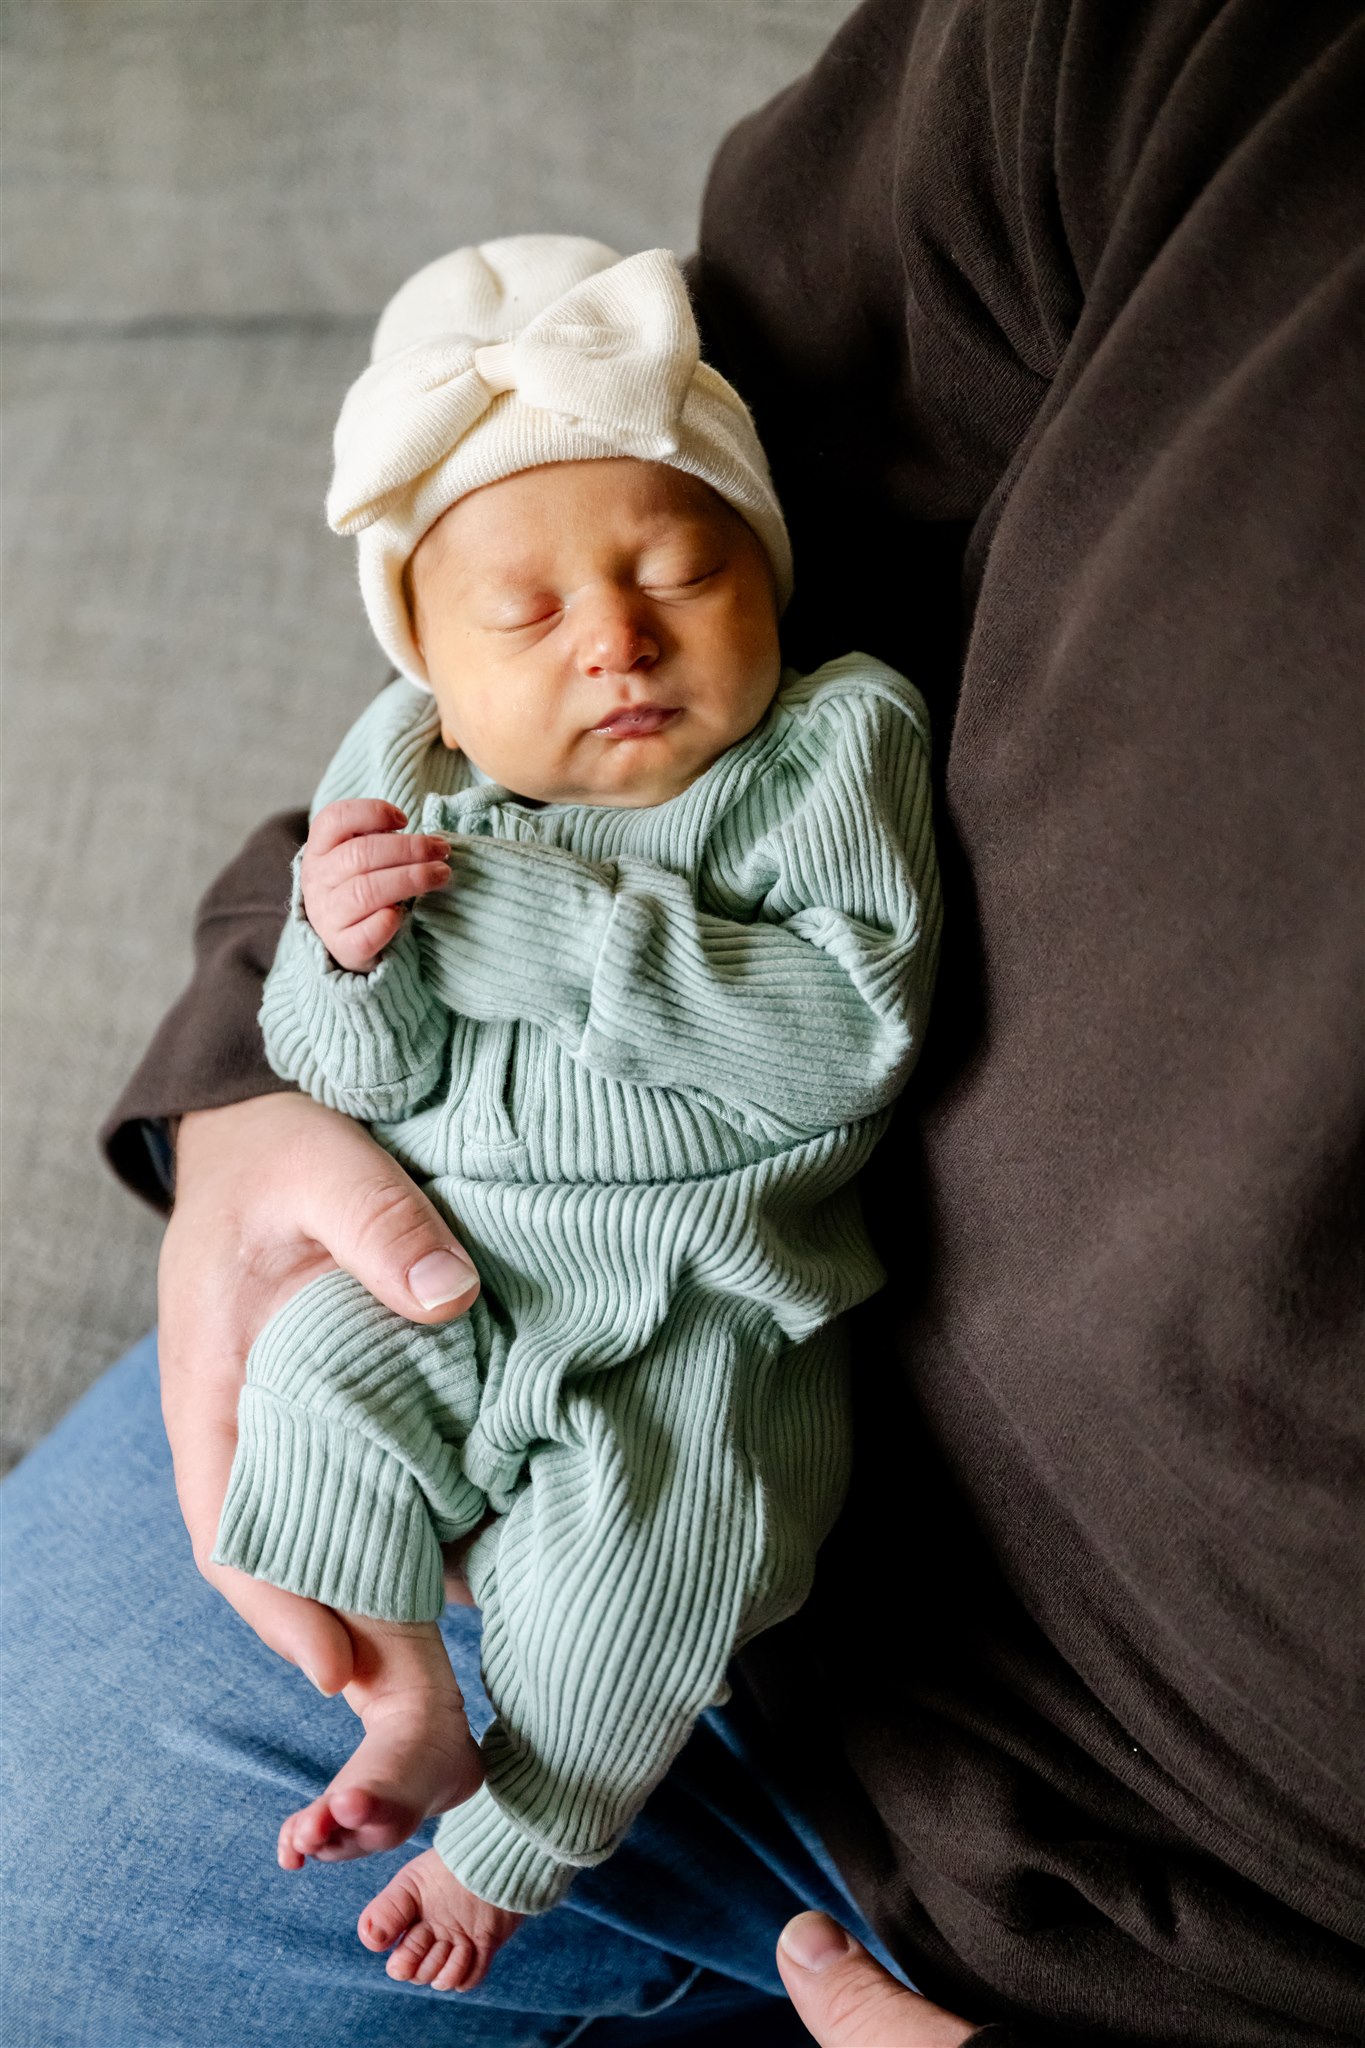 A newborn baby sleeps in dad's arms while wearing a white beanie with a bow and a green onesie